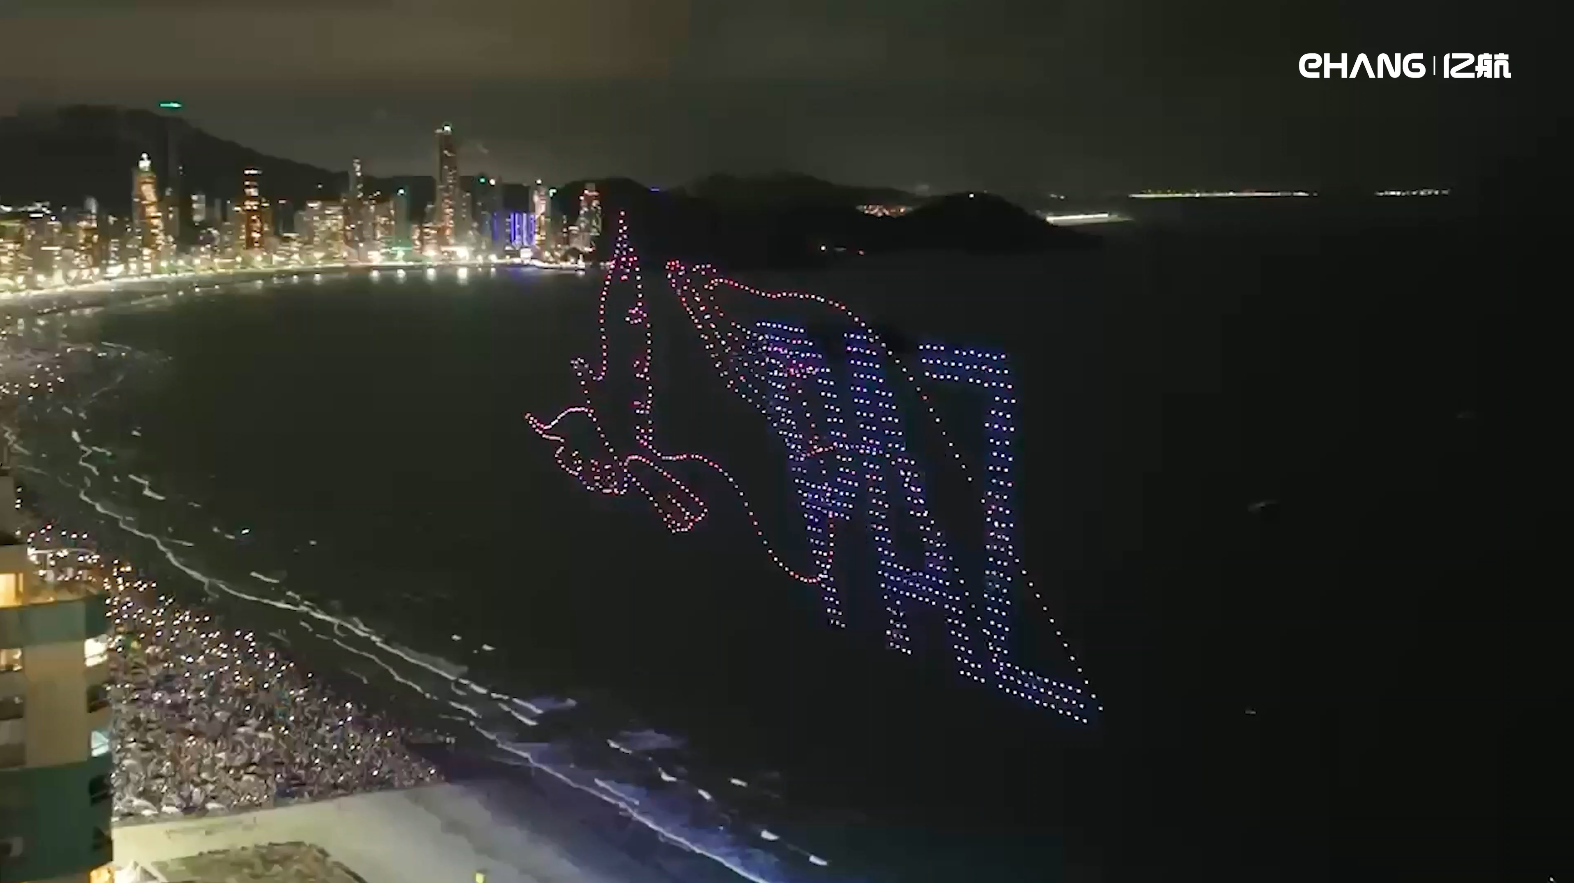 EHang Drone Light Show Welcomes New Year in Brazil